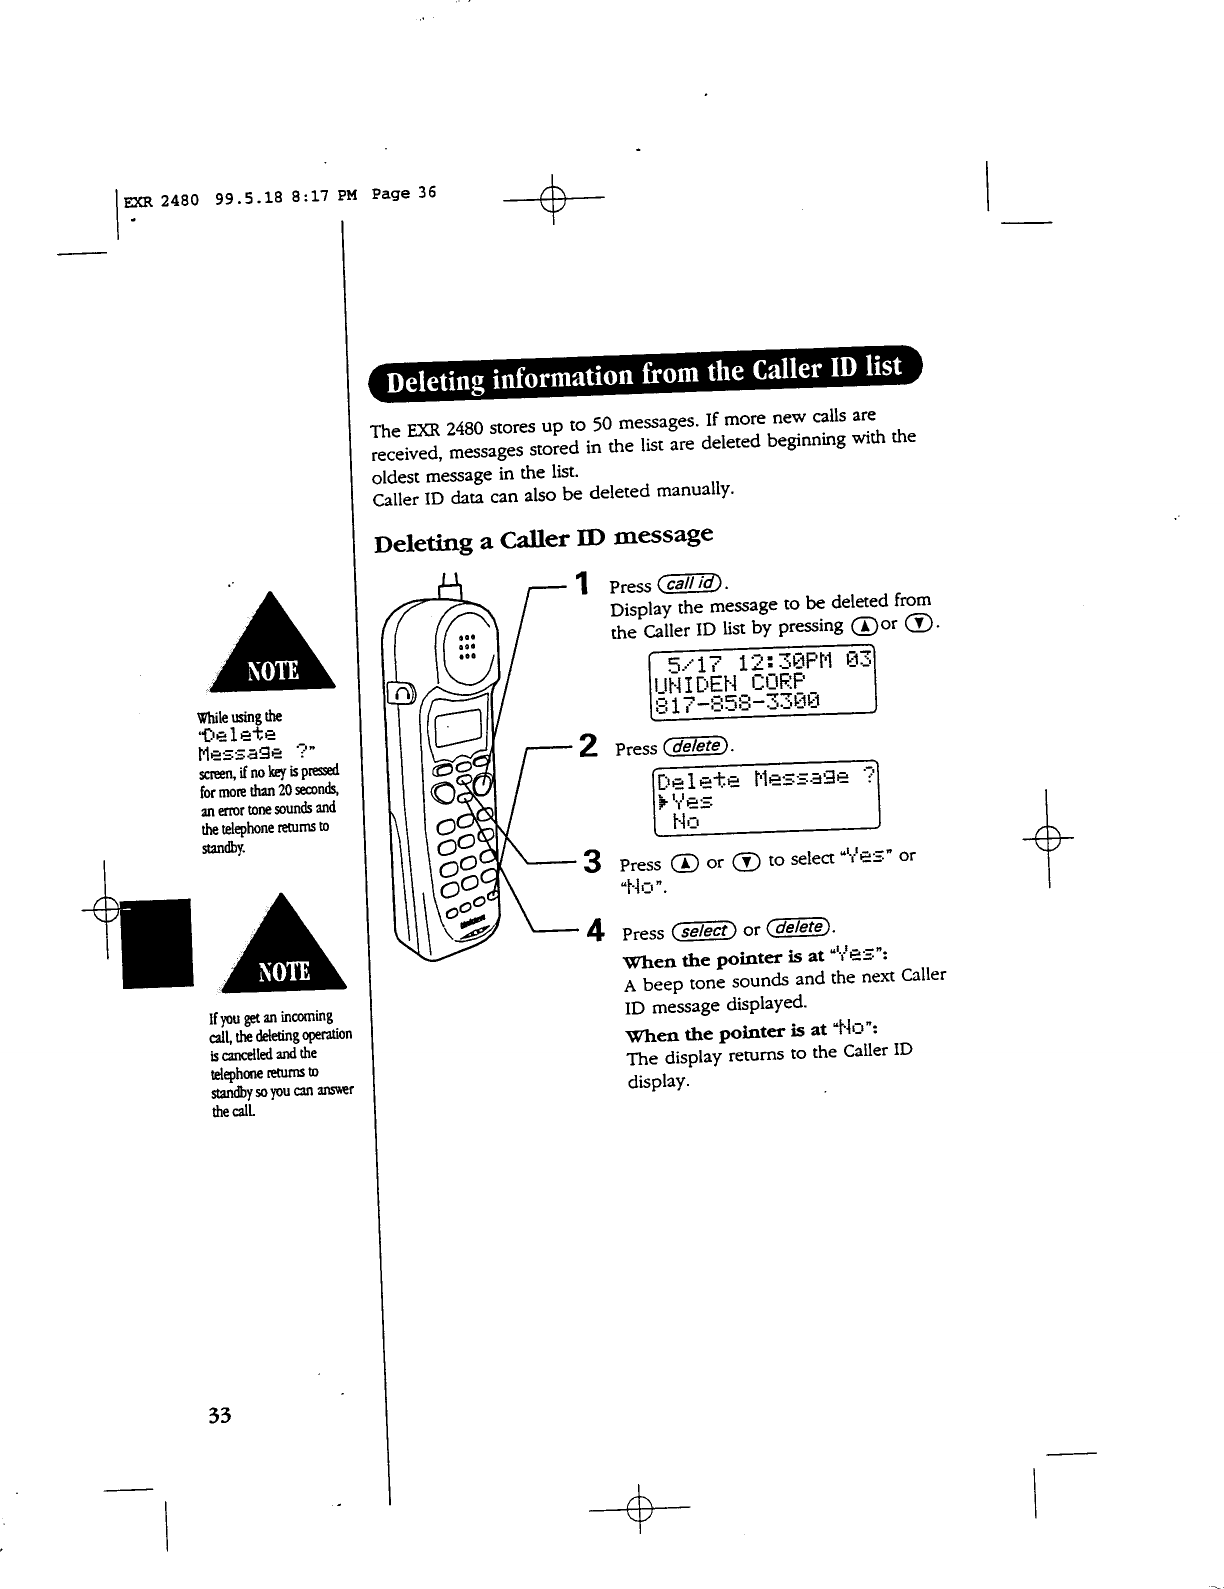 User Manual For Toshiba Ty-ckm 39 Cd Player